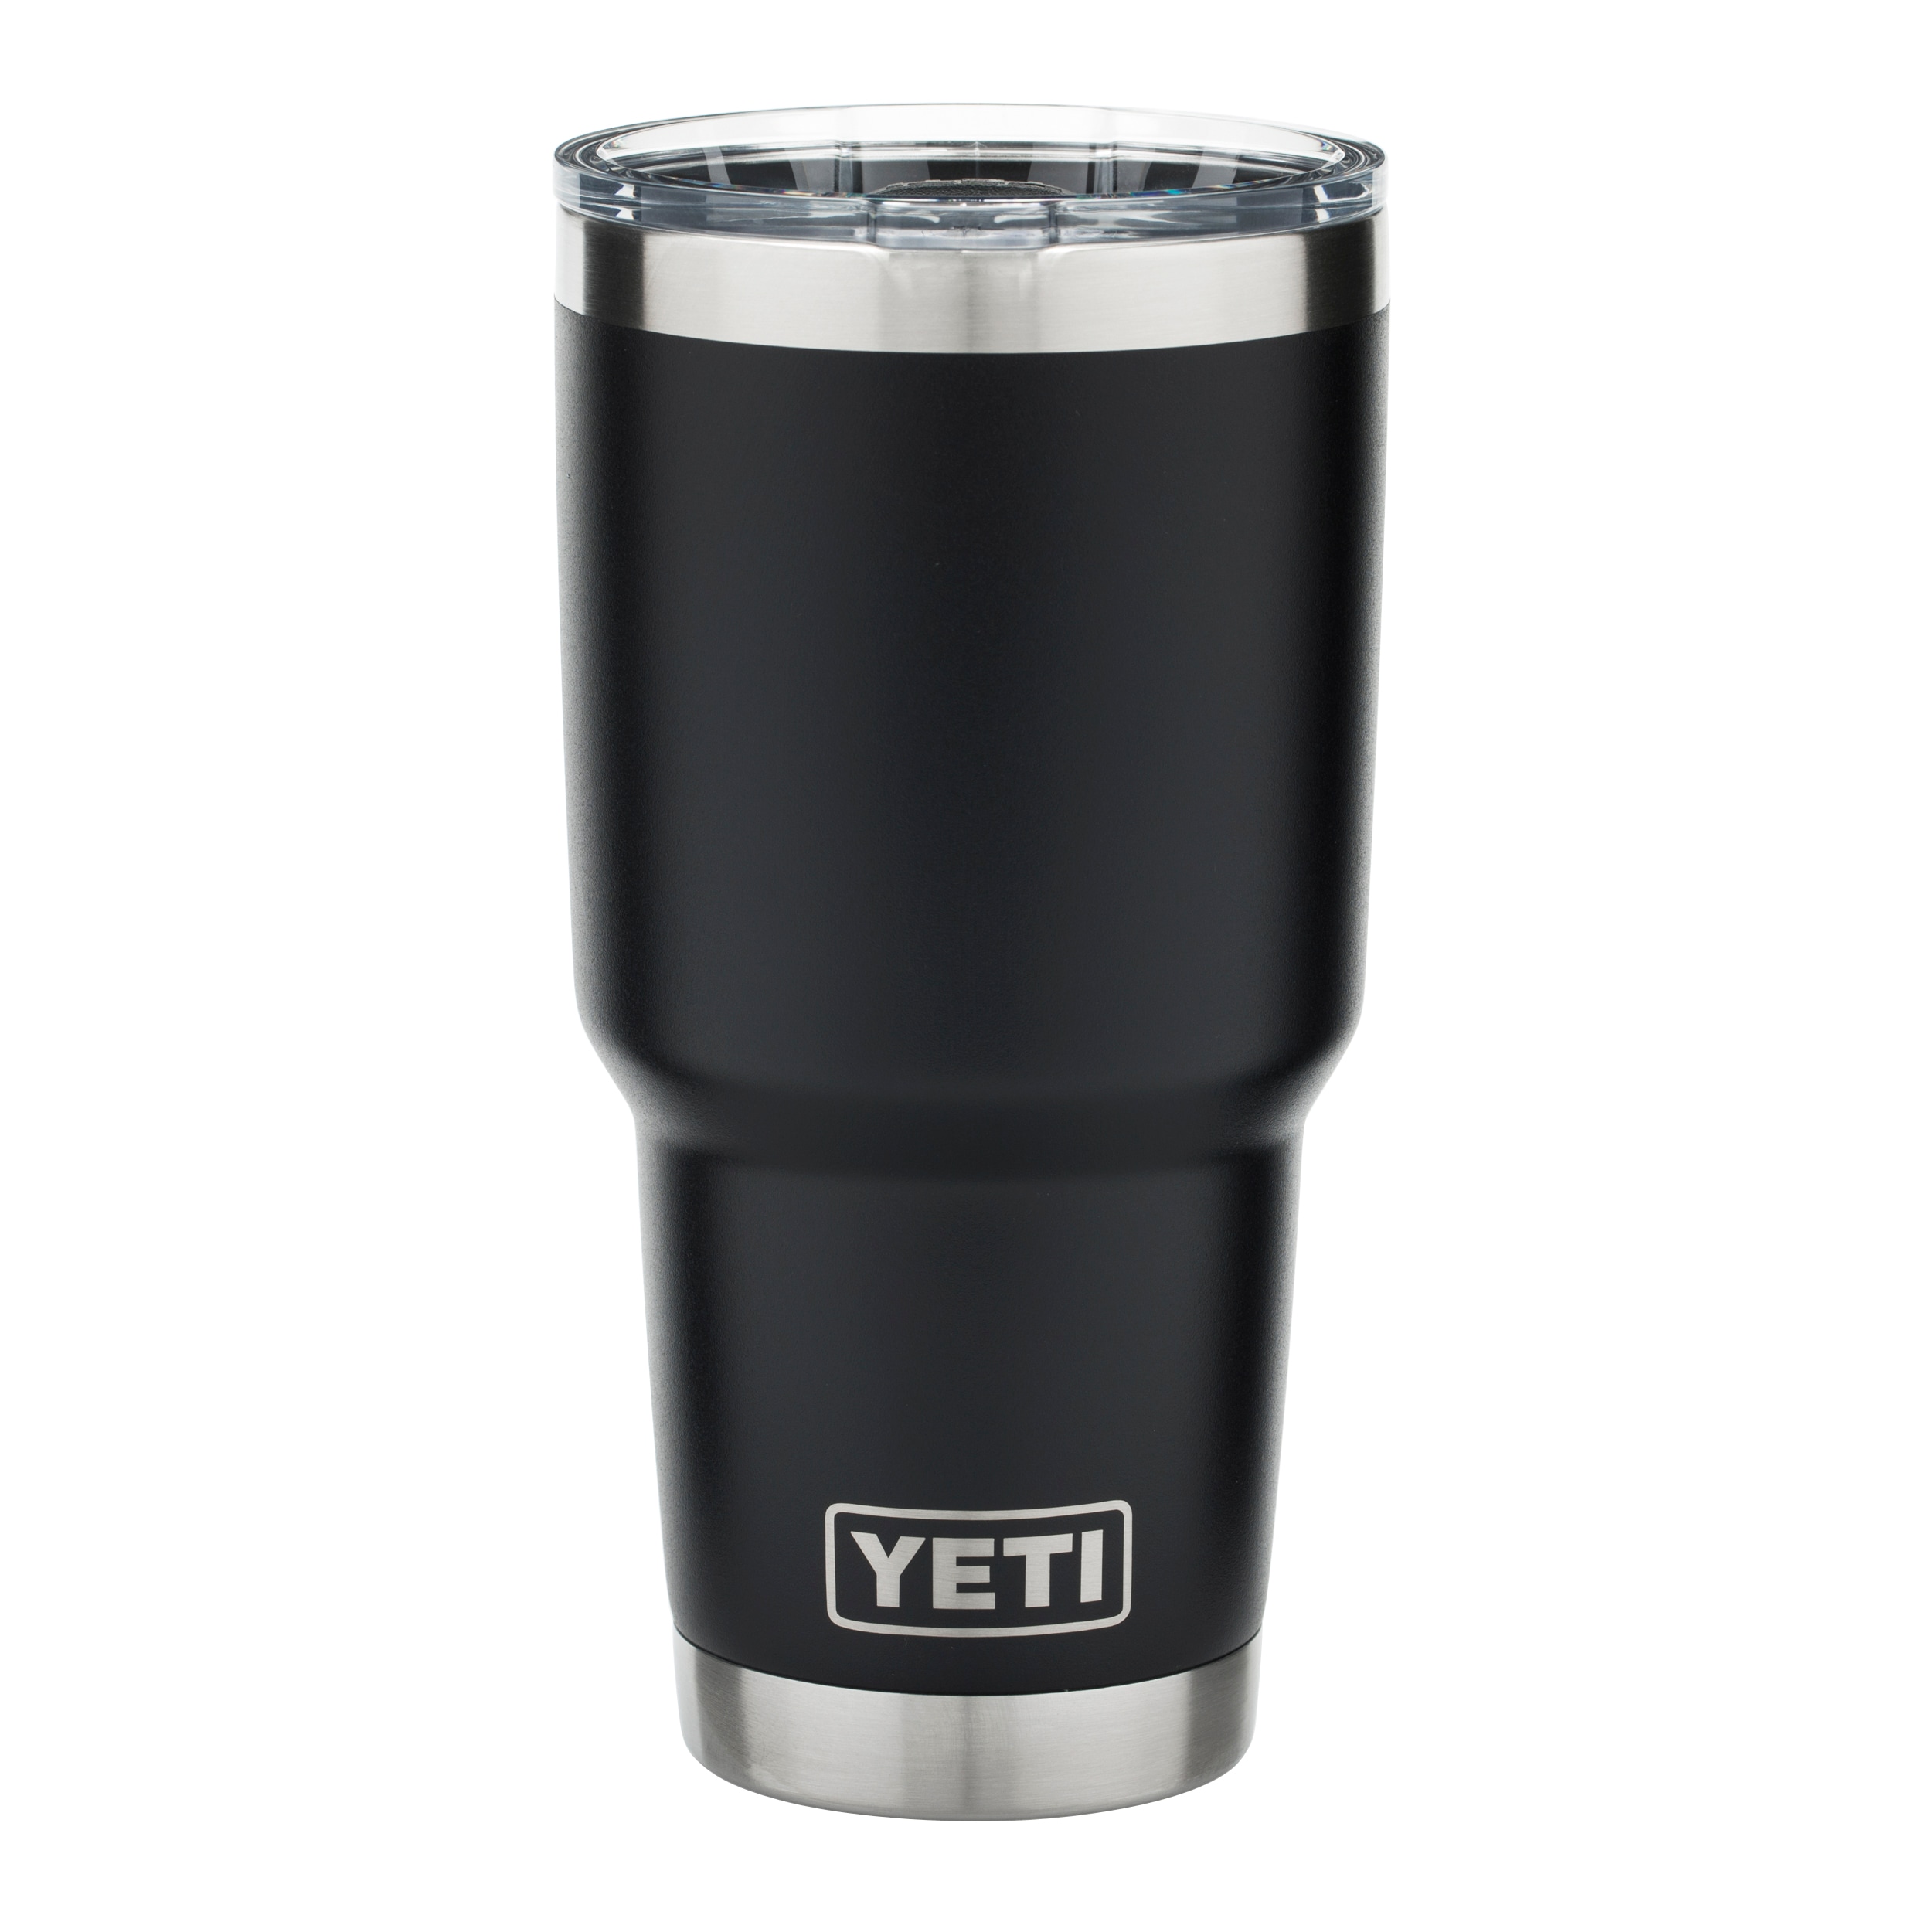 Yeti Magnetic Slider Replacement - Yeti Magslider replacement - Yeti lid  magnet fits All Yeti Tumbler Magslider Lids - (USA)-BPA FREE/HAND WASH ONLY